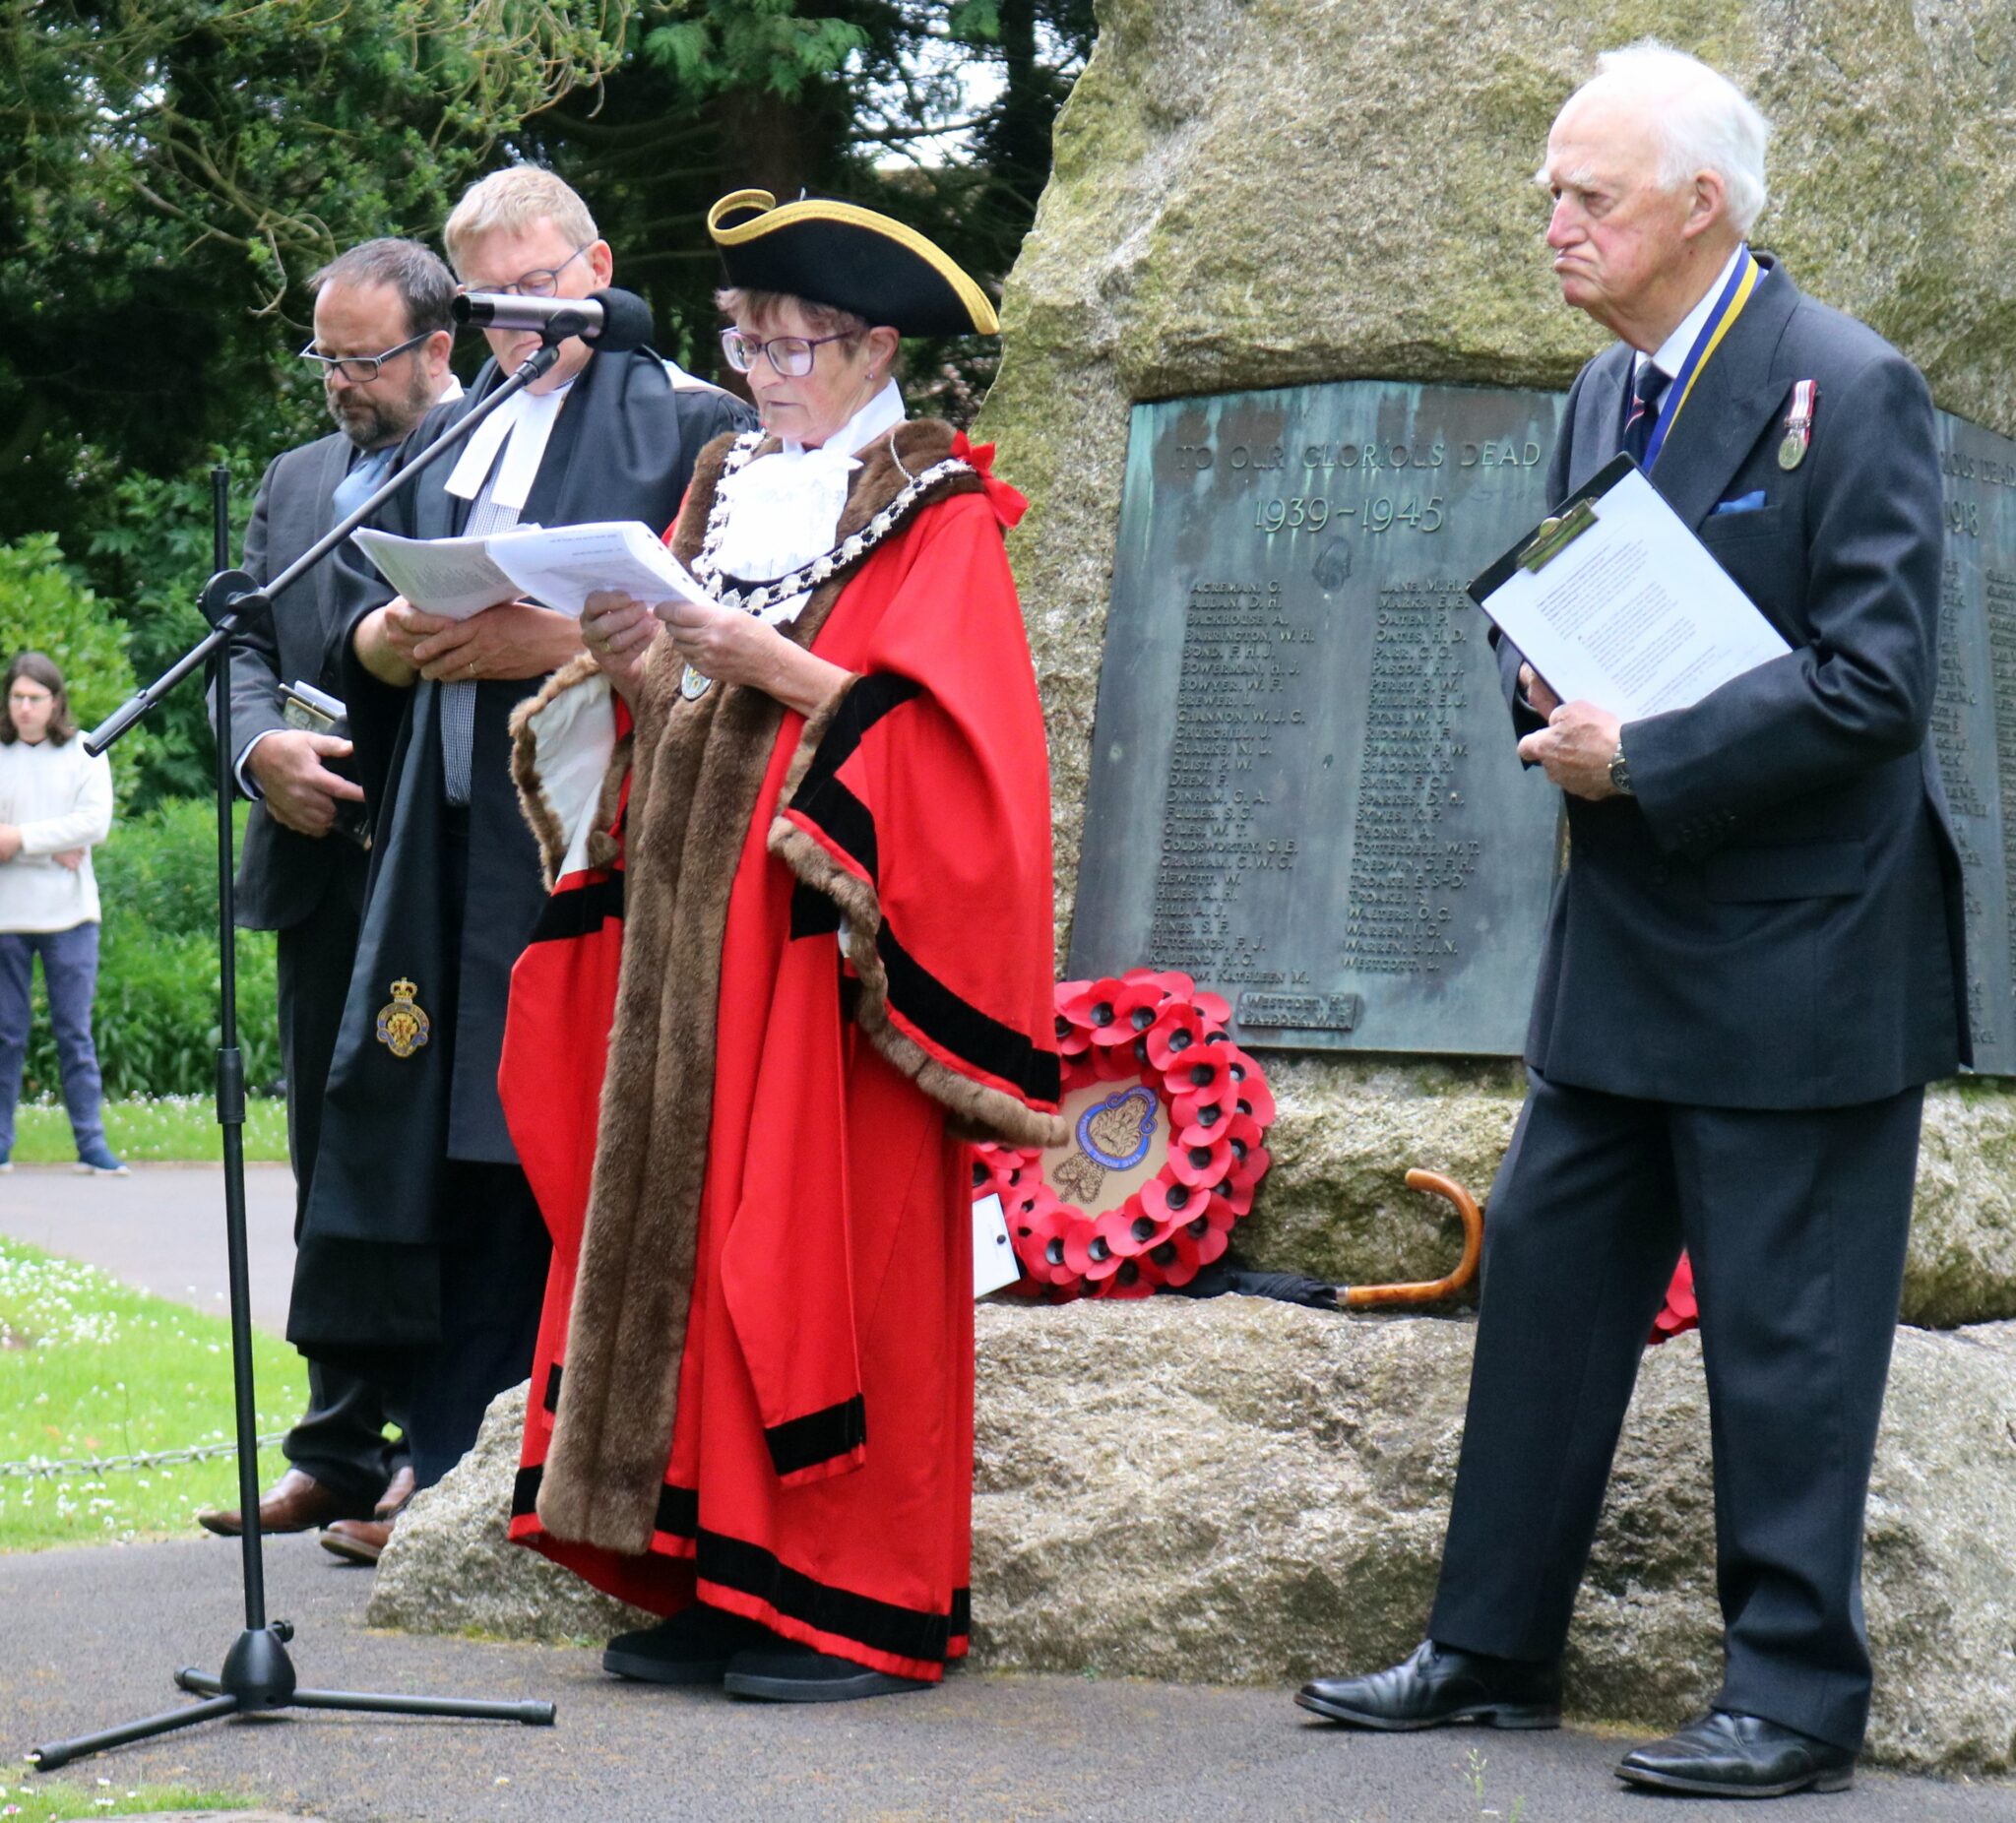 Mayor Janet Lloyd reads a speech while Royal British Legion Branch President Michael Rose stands to her left.